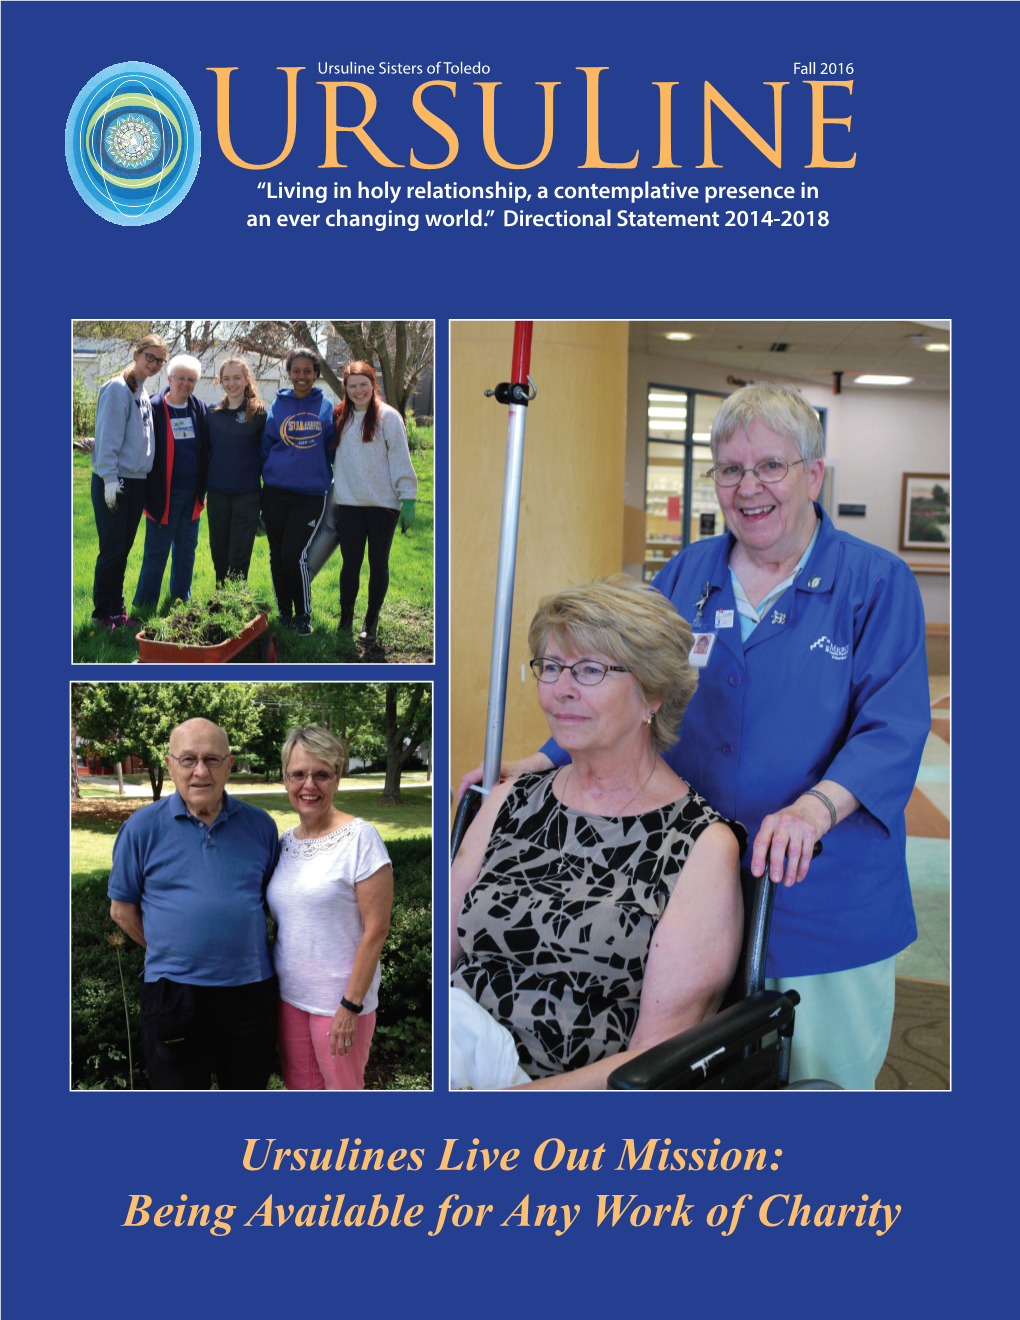 Ursulines Live out Mission: Being Available for Any Work of Charity